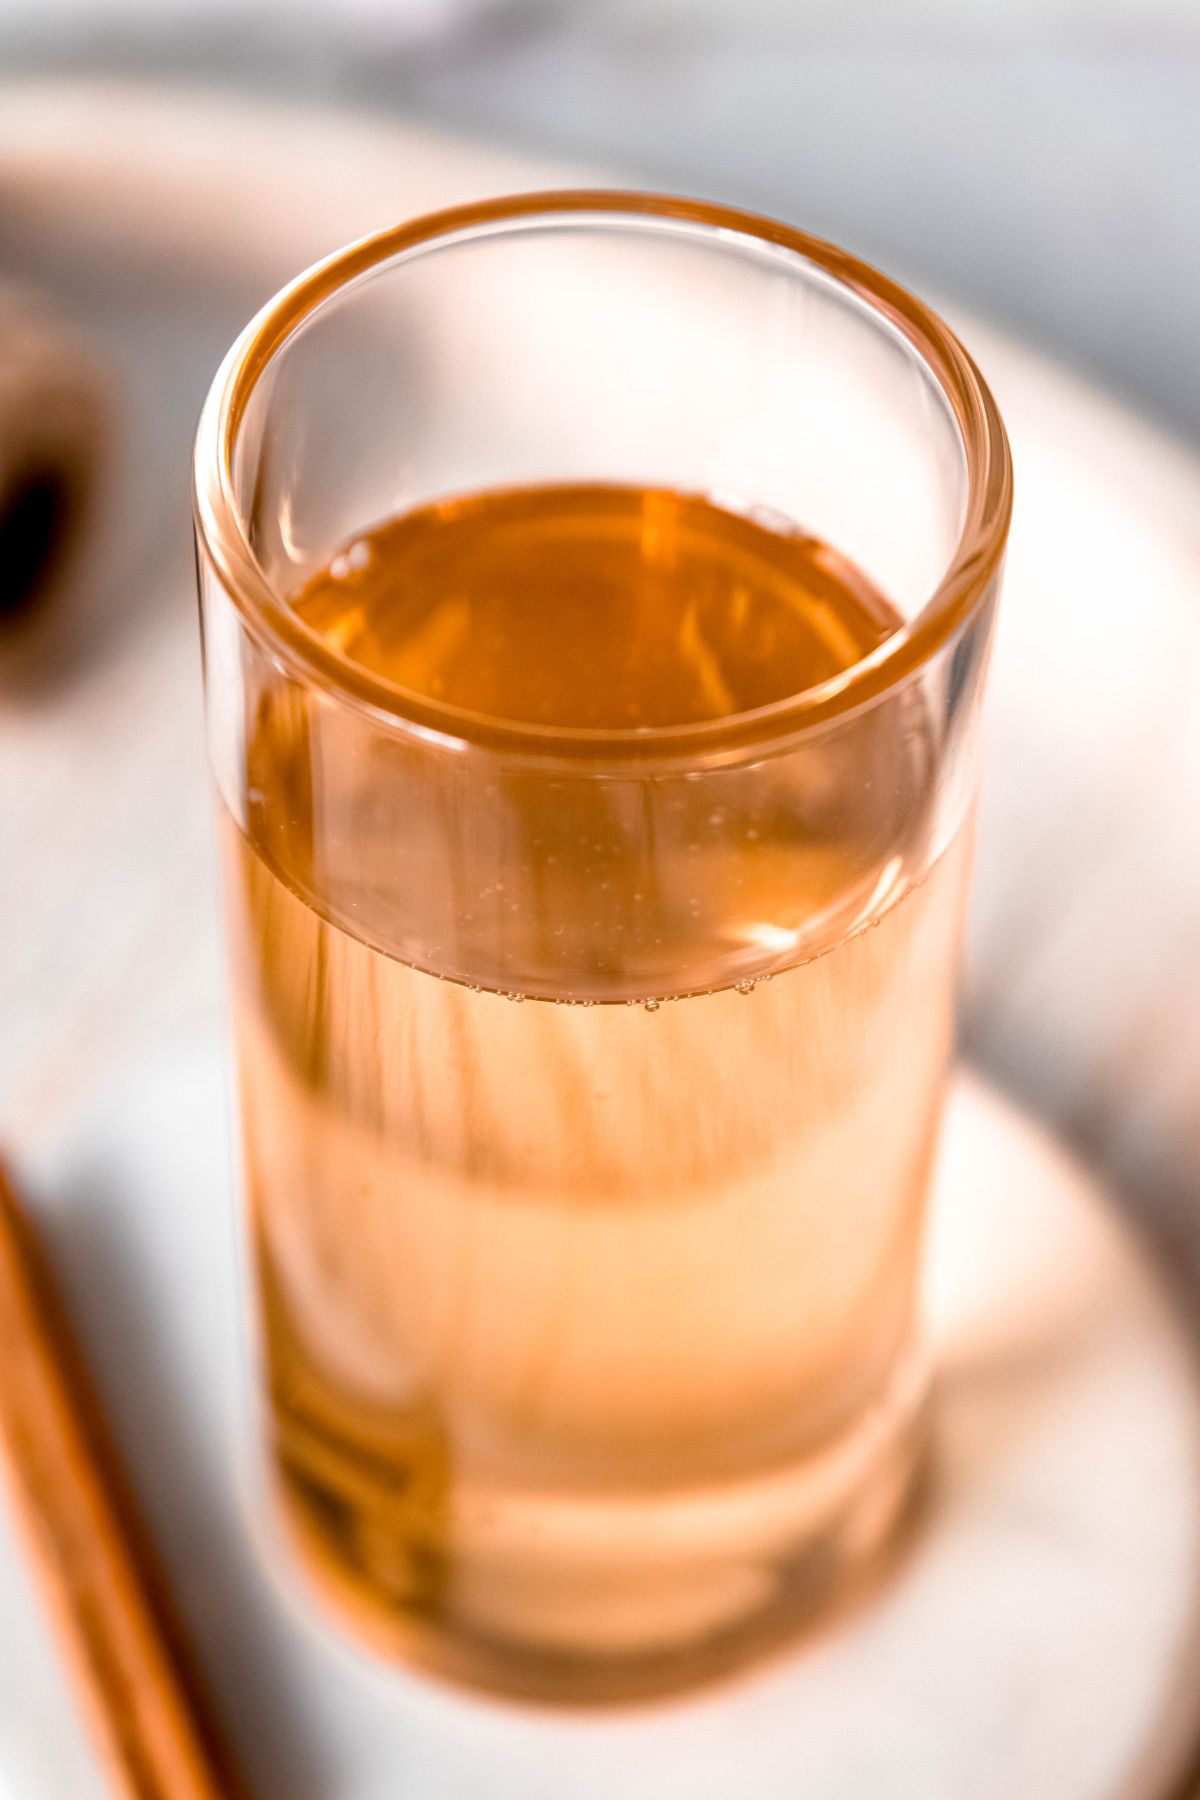 45 degree angle shot of a collins glass filled with light amber-colored cinnamon syrup.